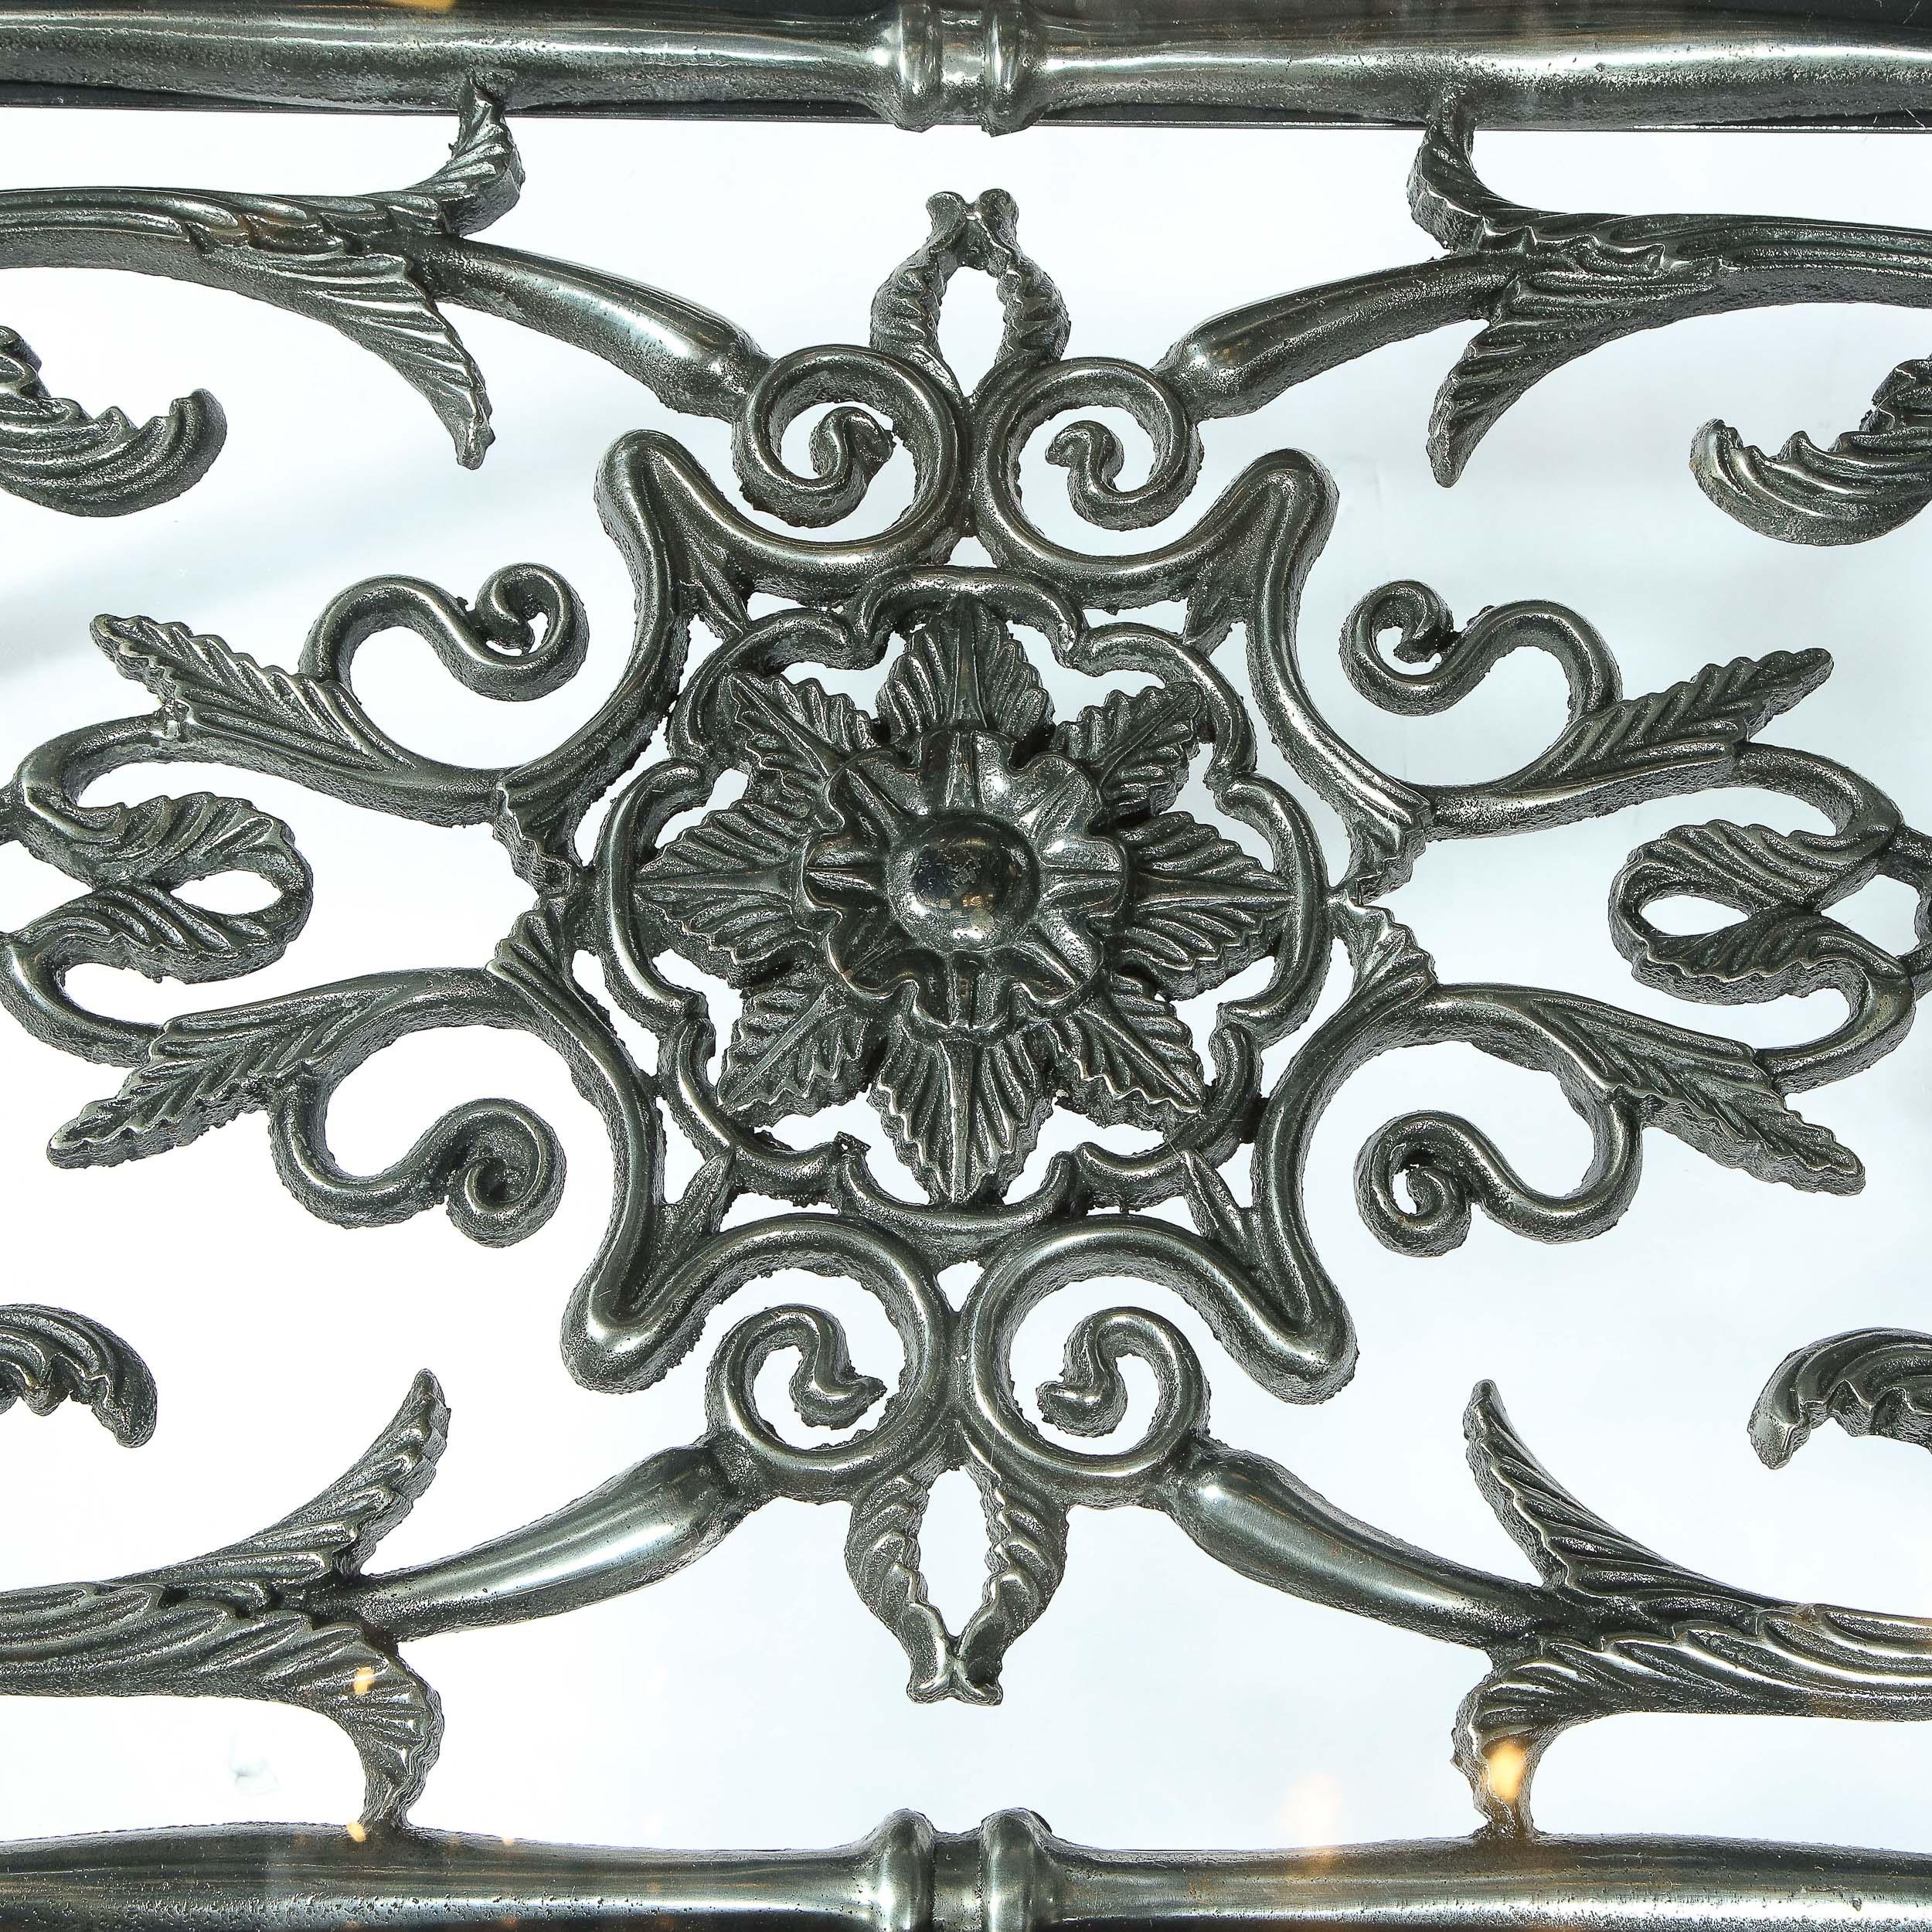 American Art Deco Antique Burnished Cast-Iron Gate Cocktail Table with Floral Detailing For Sale